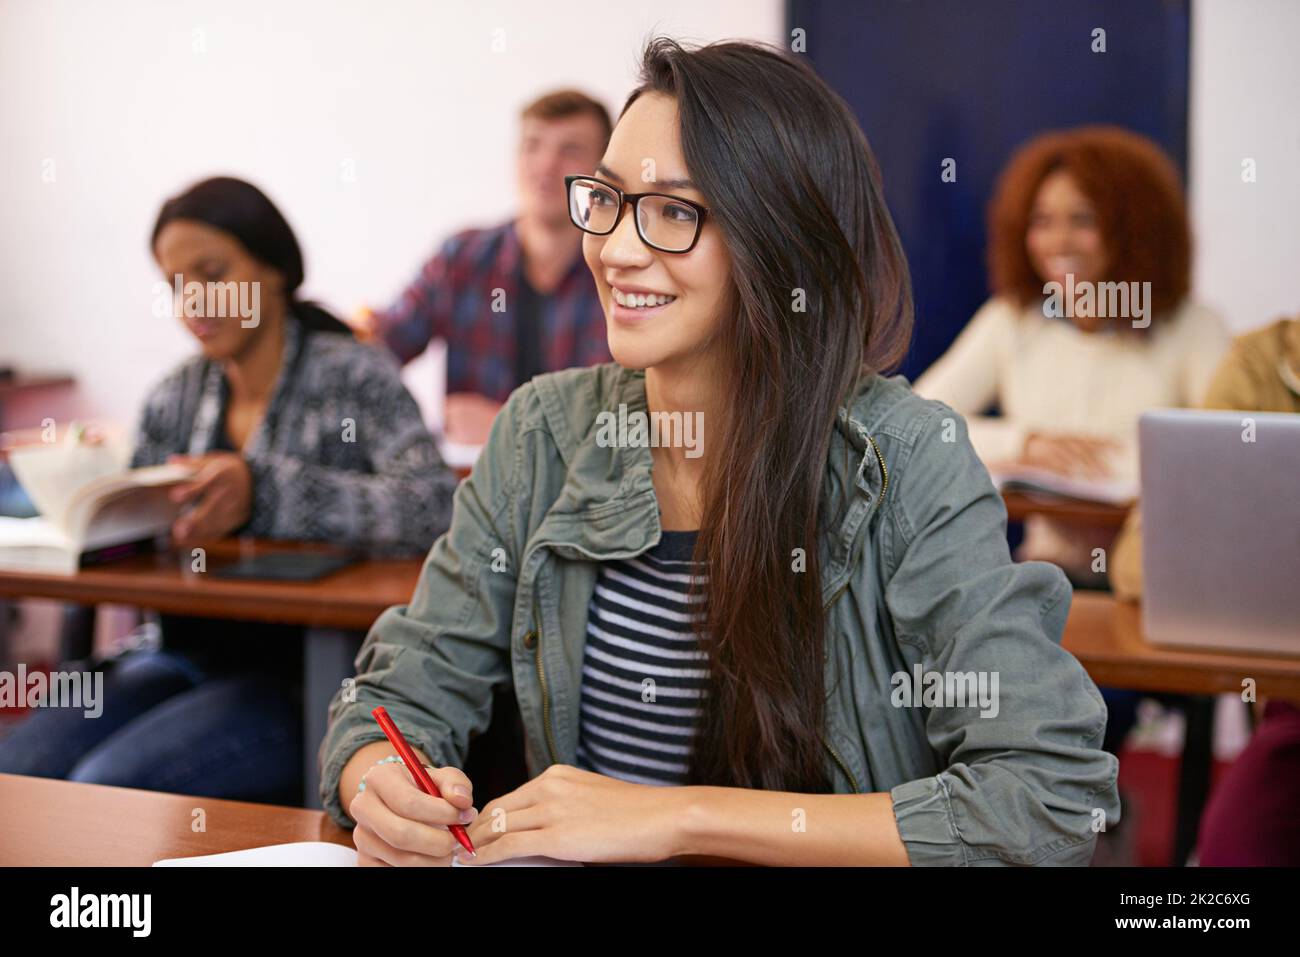 Achieving my goals a semester at a time. Shot of a happy student paying attention in class. Stock Photo